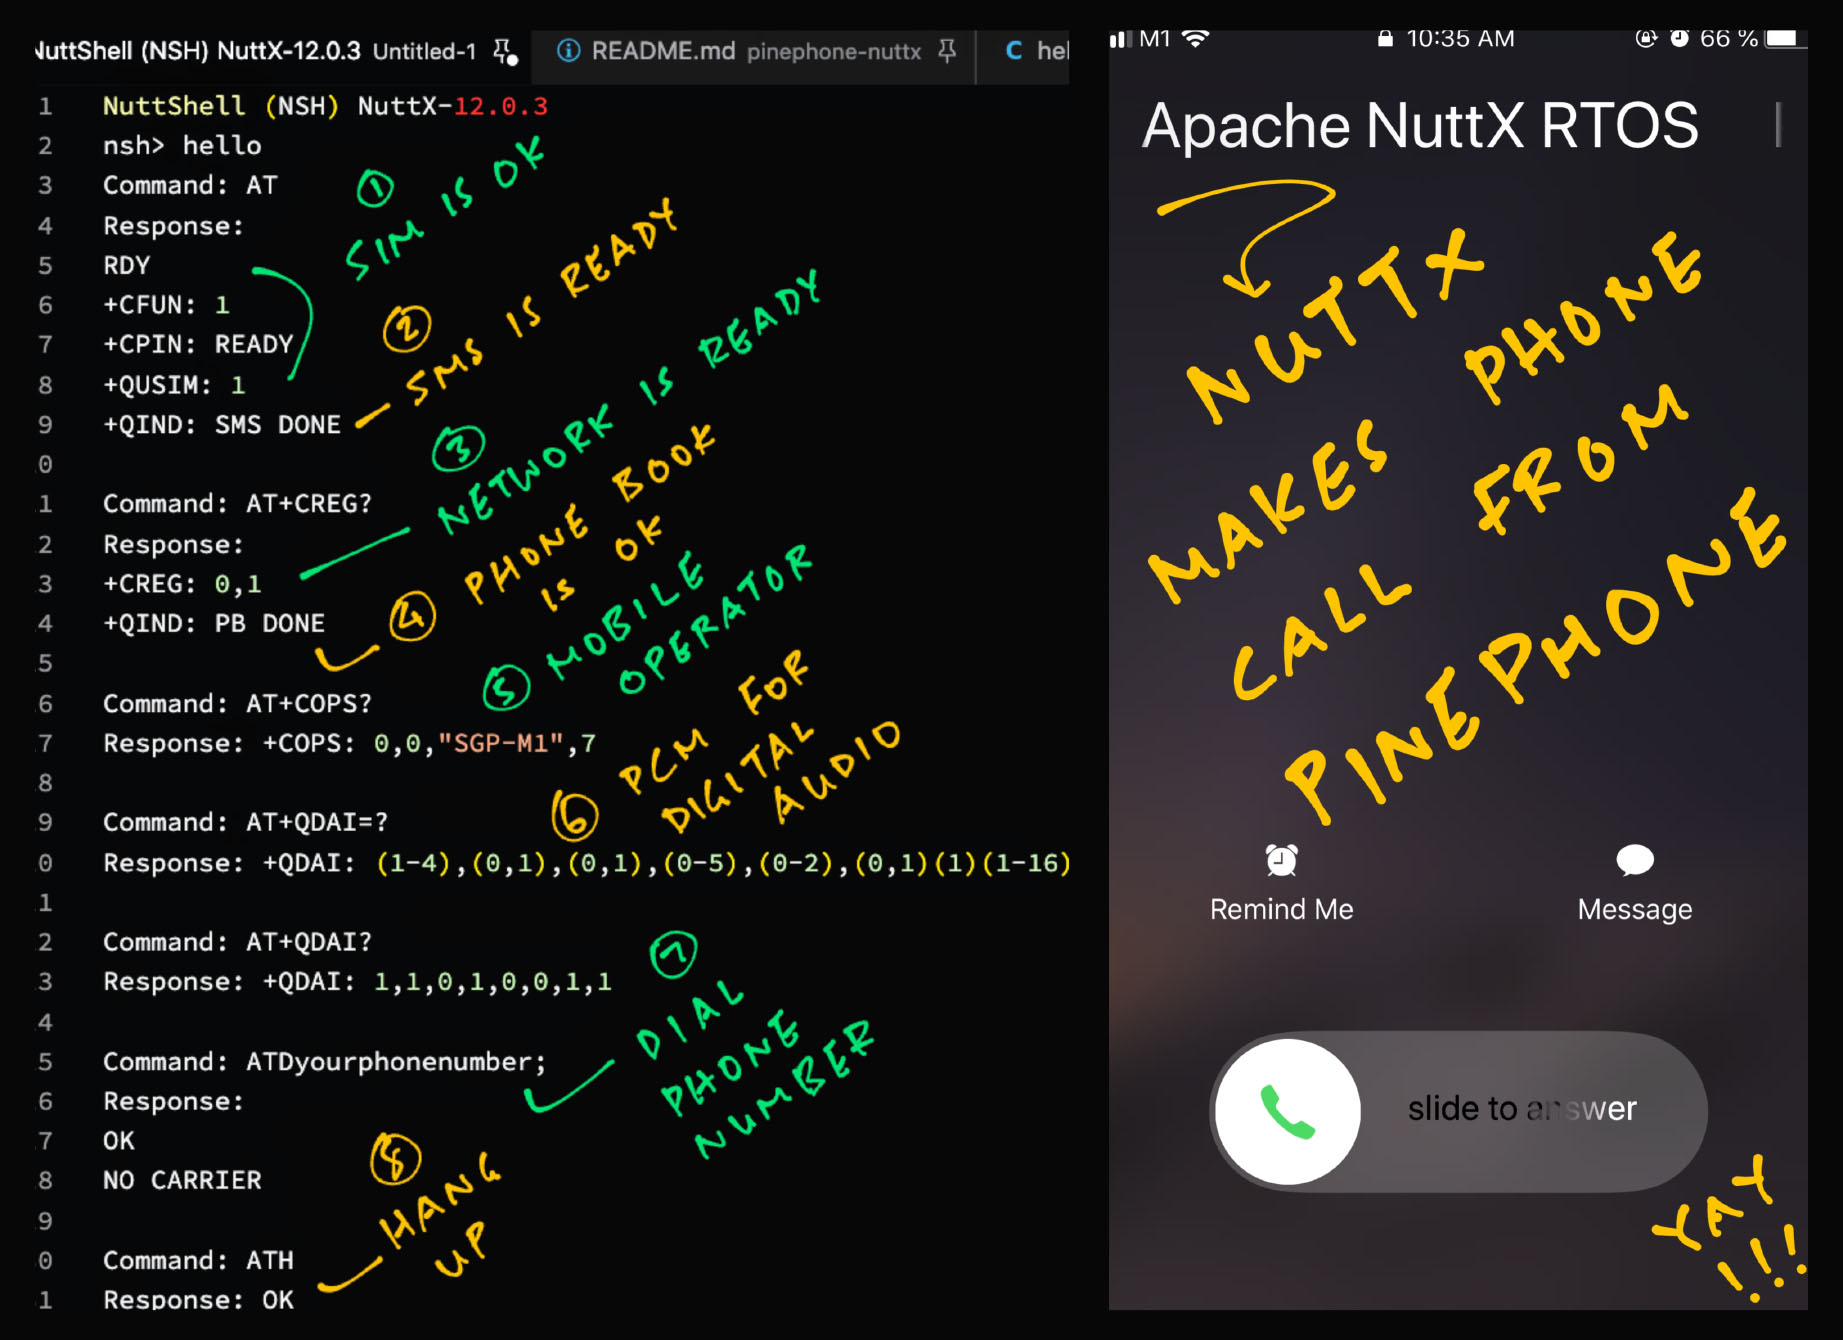 Apache NuttX RTOS makes a Phone Call from Pine64 PinePhone